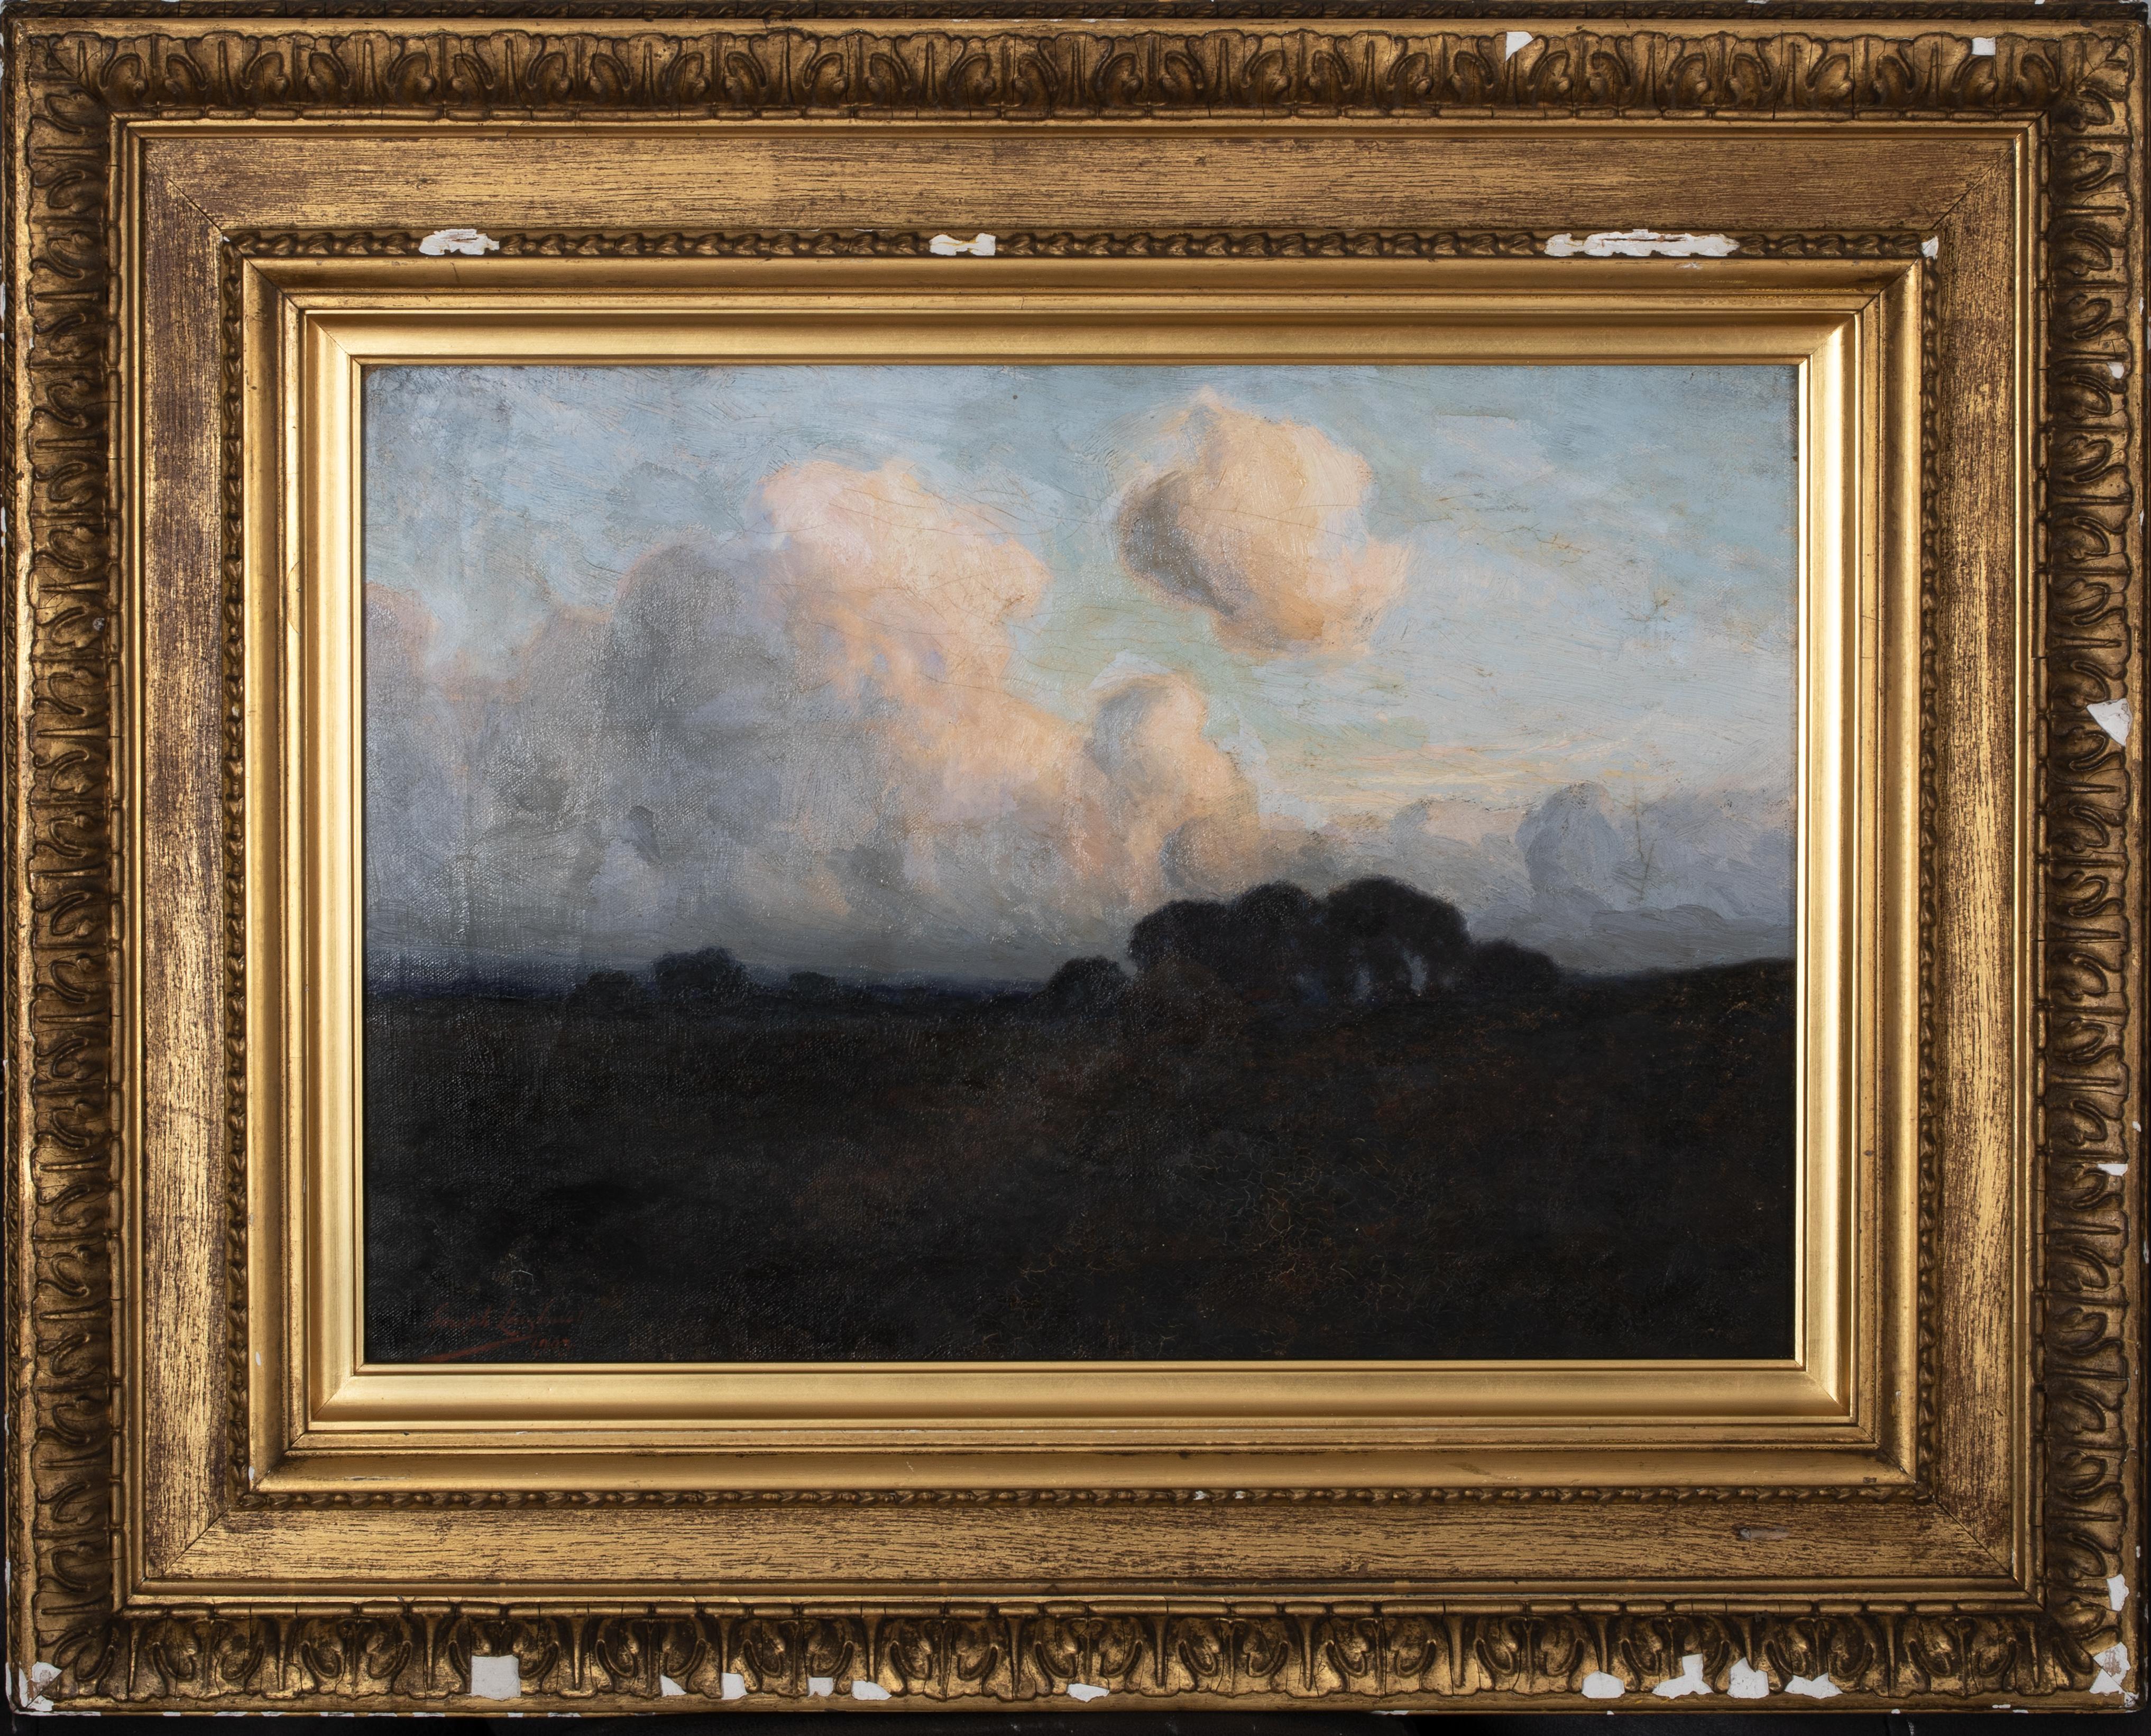 Unknown Landscape Painting - As The Day Closes, New Forest, Hampshire, dated 1907  by Joseph Longhurst 